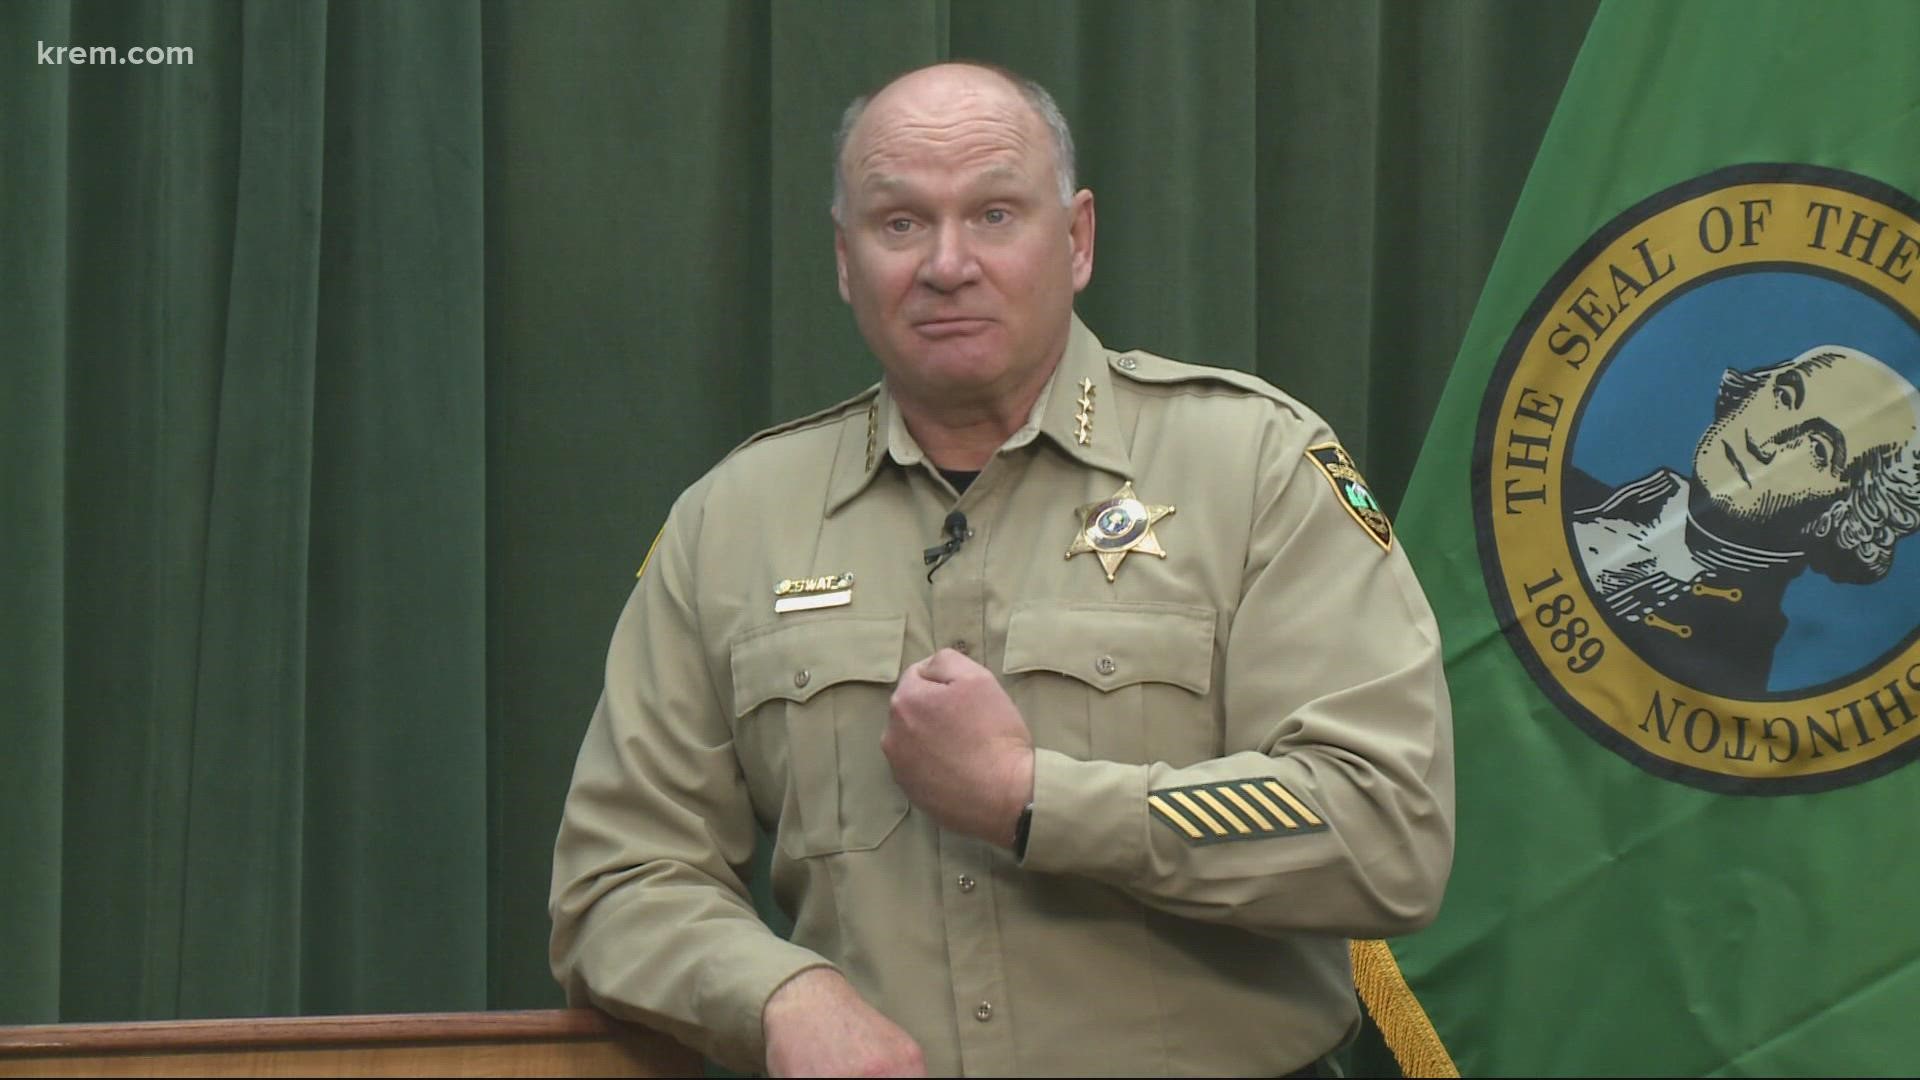 Sheriff Ozzie Knezovich says he encourages deputies to get vaccinated but is opposed to Gov. Inslee's mandate.